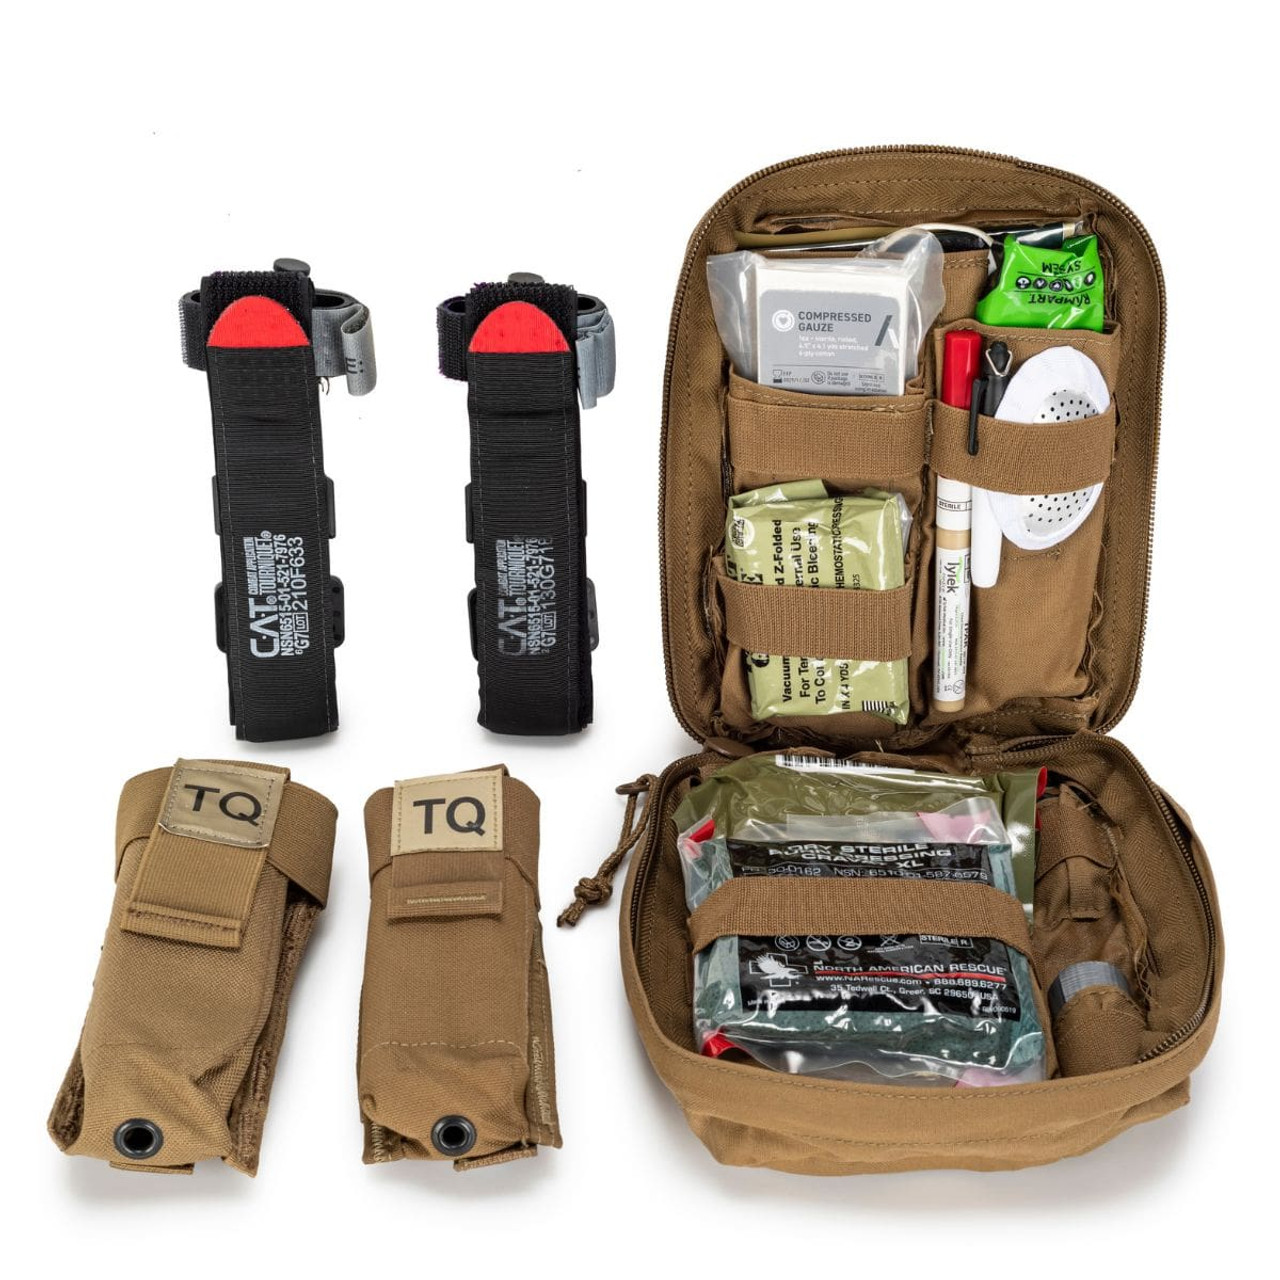 200Pcs Emergency Survival Kit and First Aid Kit Professional Survival Gear  SOS E